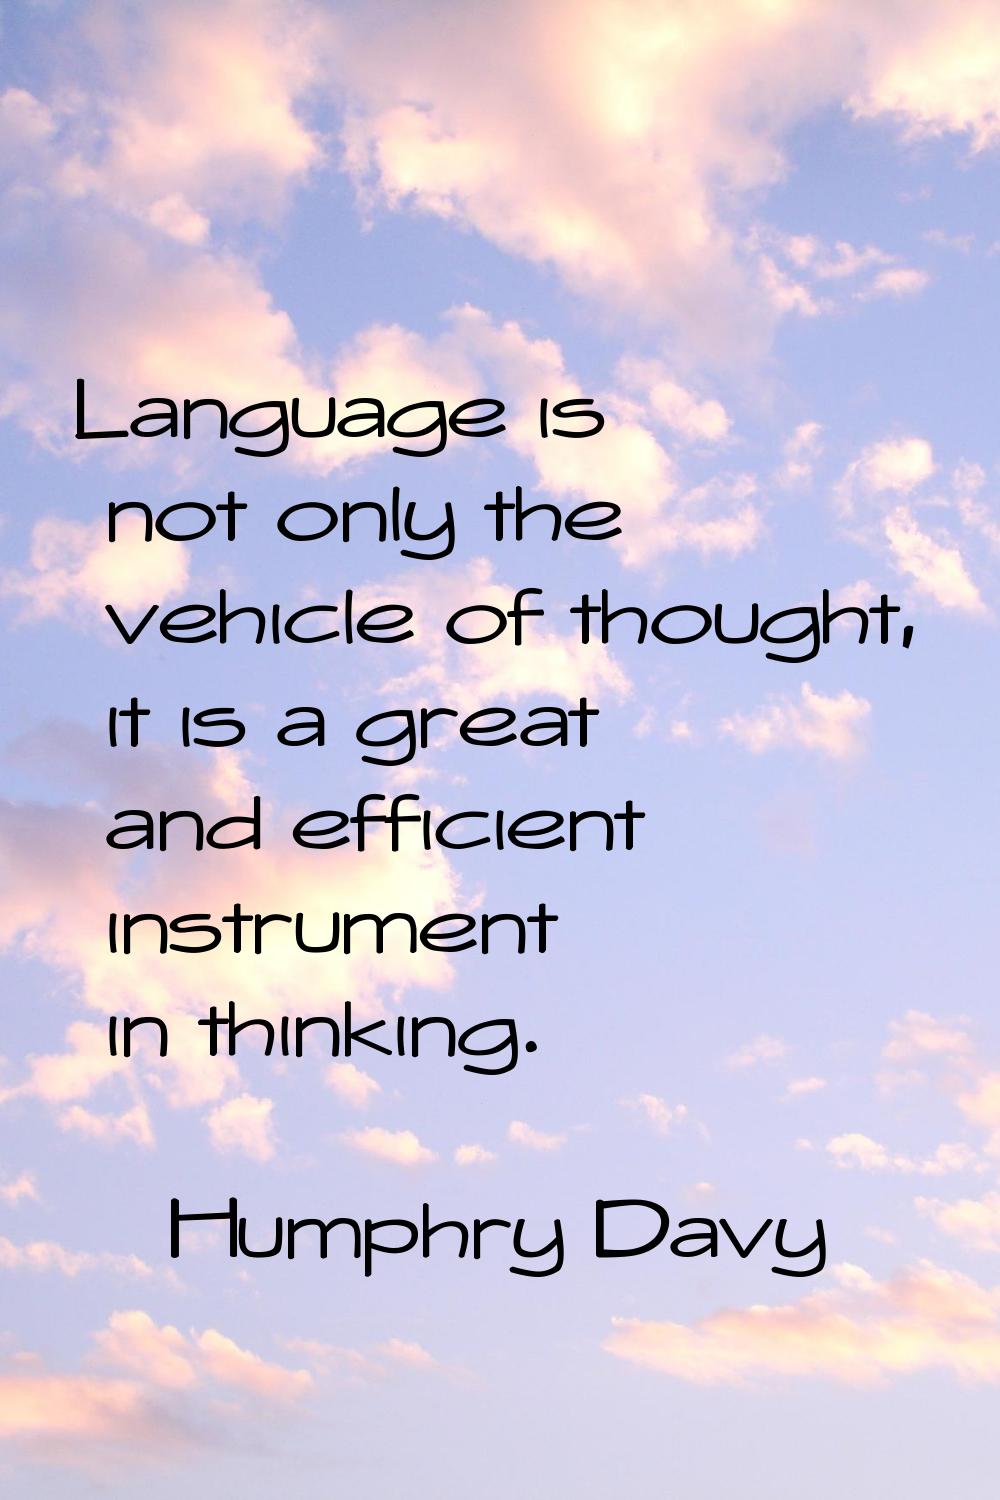 Language is not only the vehicle of thought, it is a great and efficient instrument in thinking.